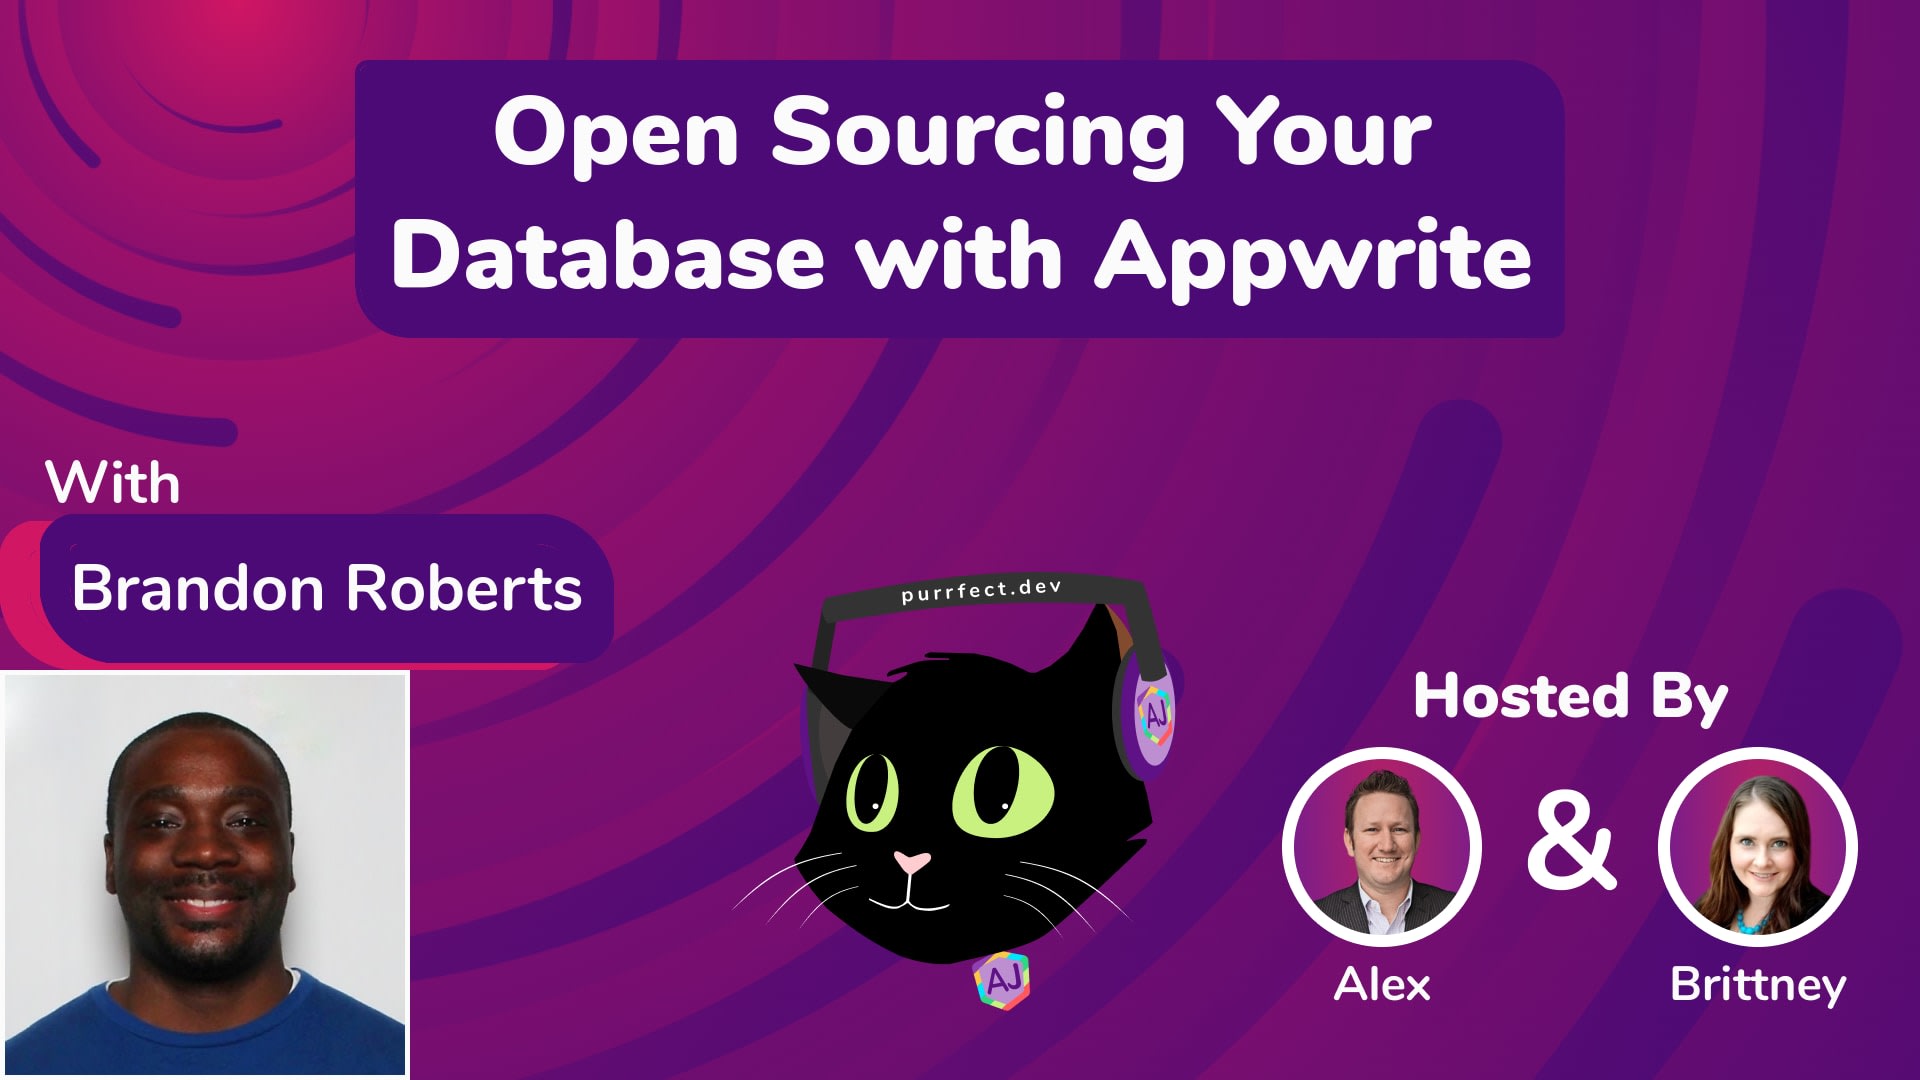 2.26 - Open Sourcing Your Database with Appwrite